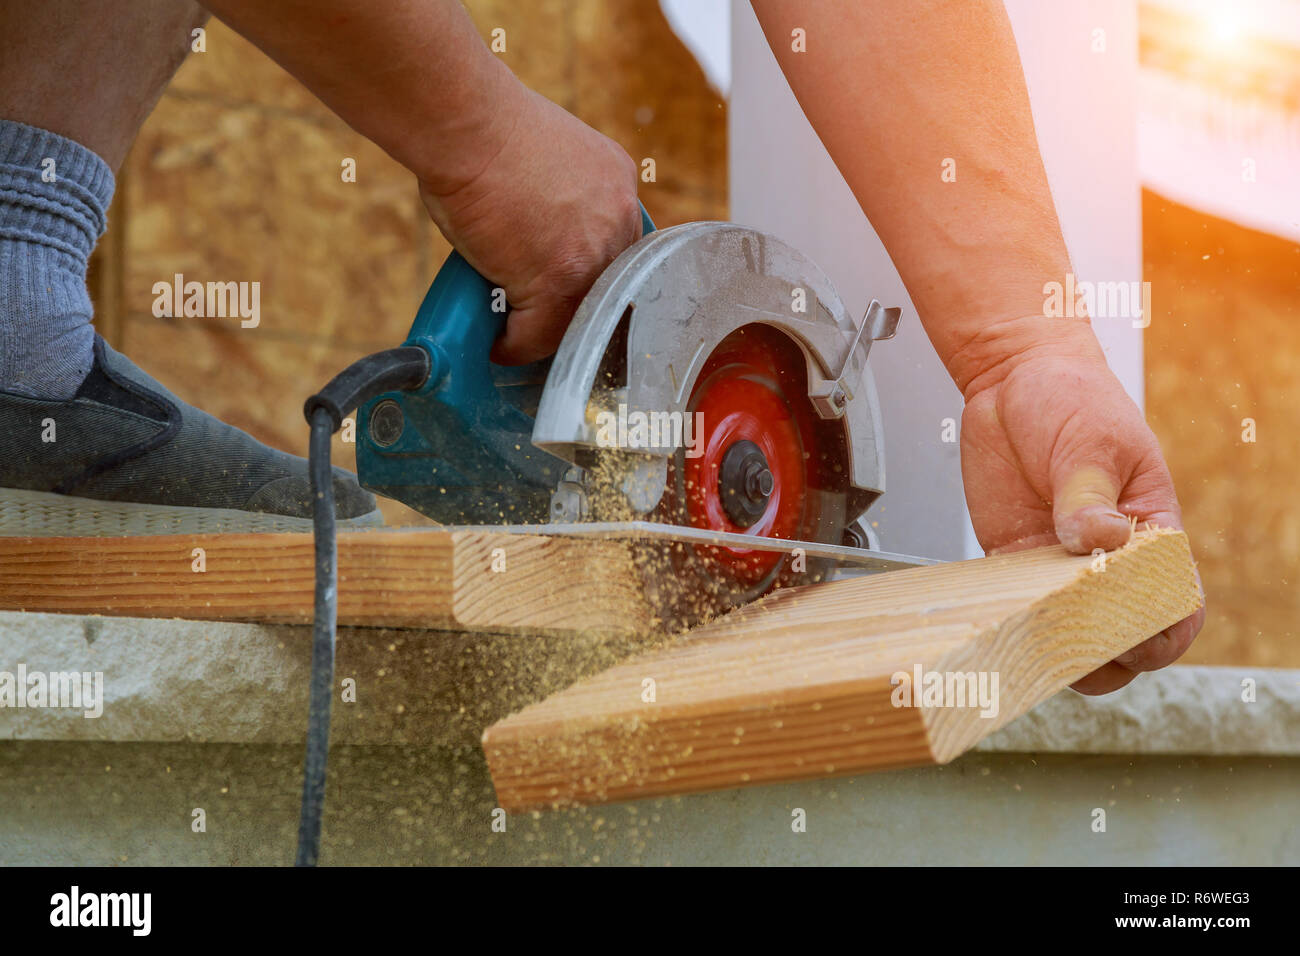 https://c8.alamy.com/comp/R6WEG3/building-contractor-worker-using-hand-held-worm-drive-circular-saw-to-cut-boards-on-a-new-home-constructiion-project-R6WEG3.jpg